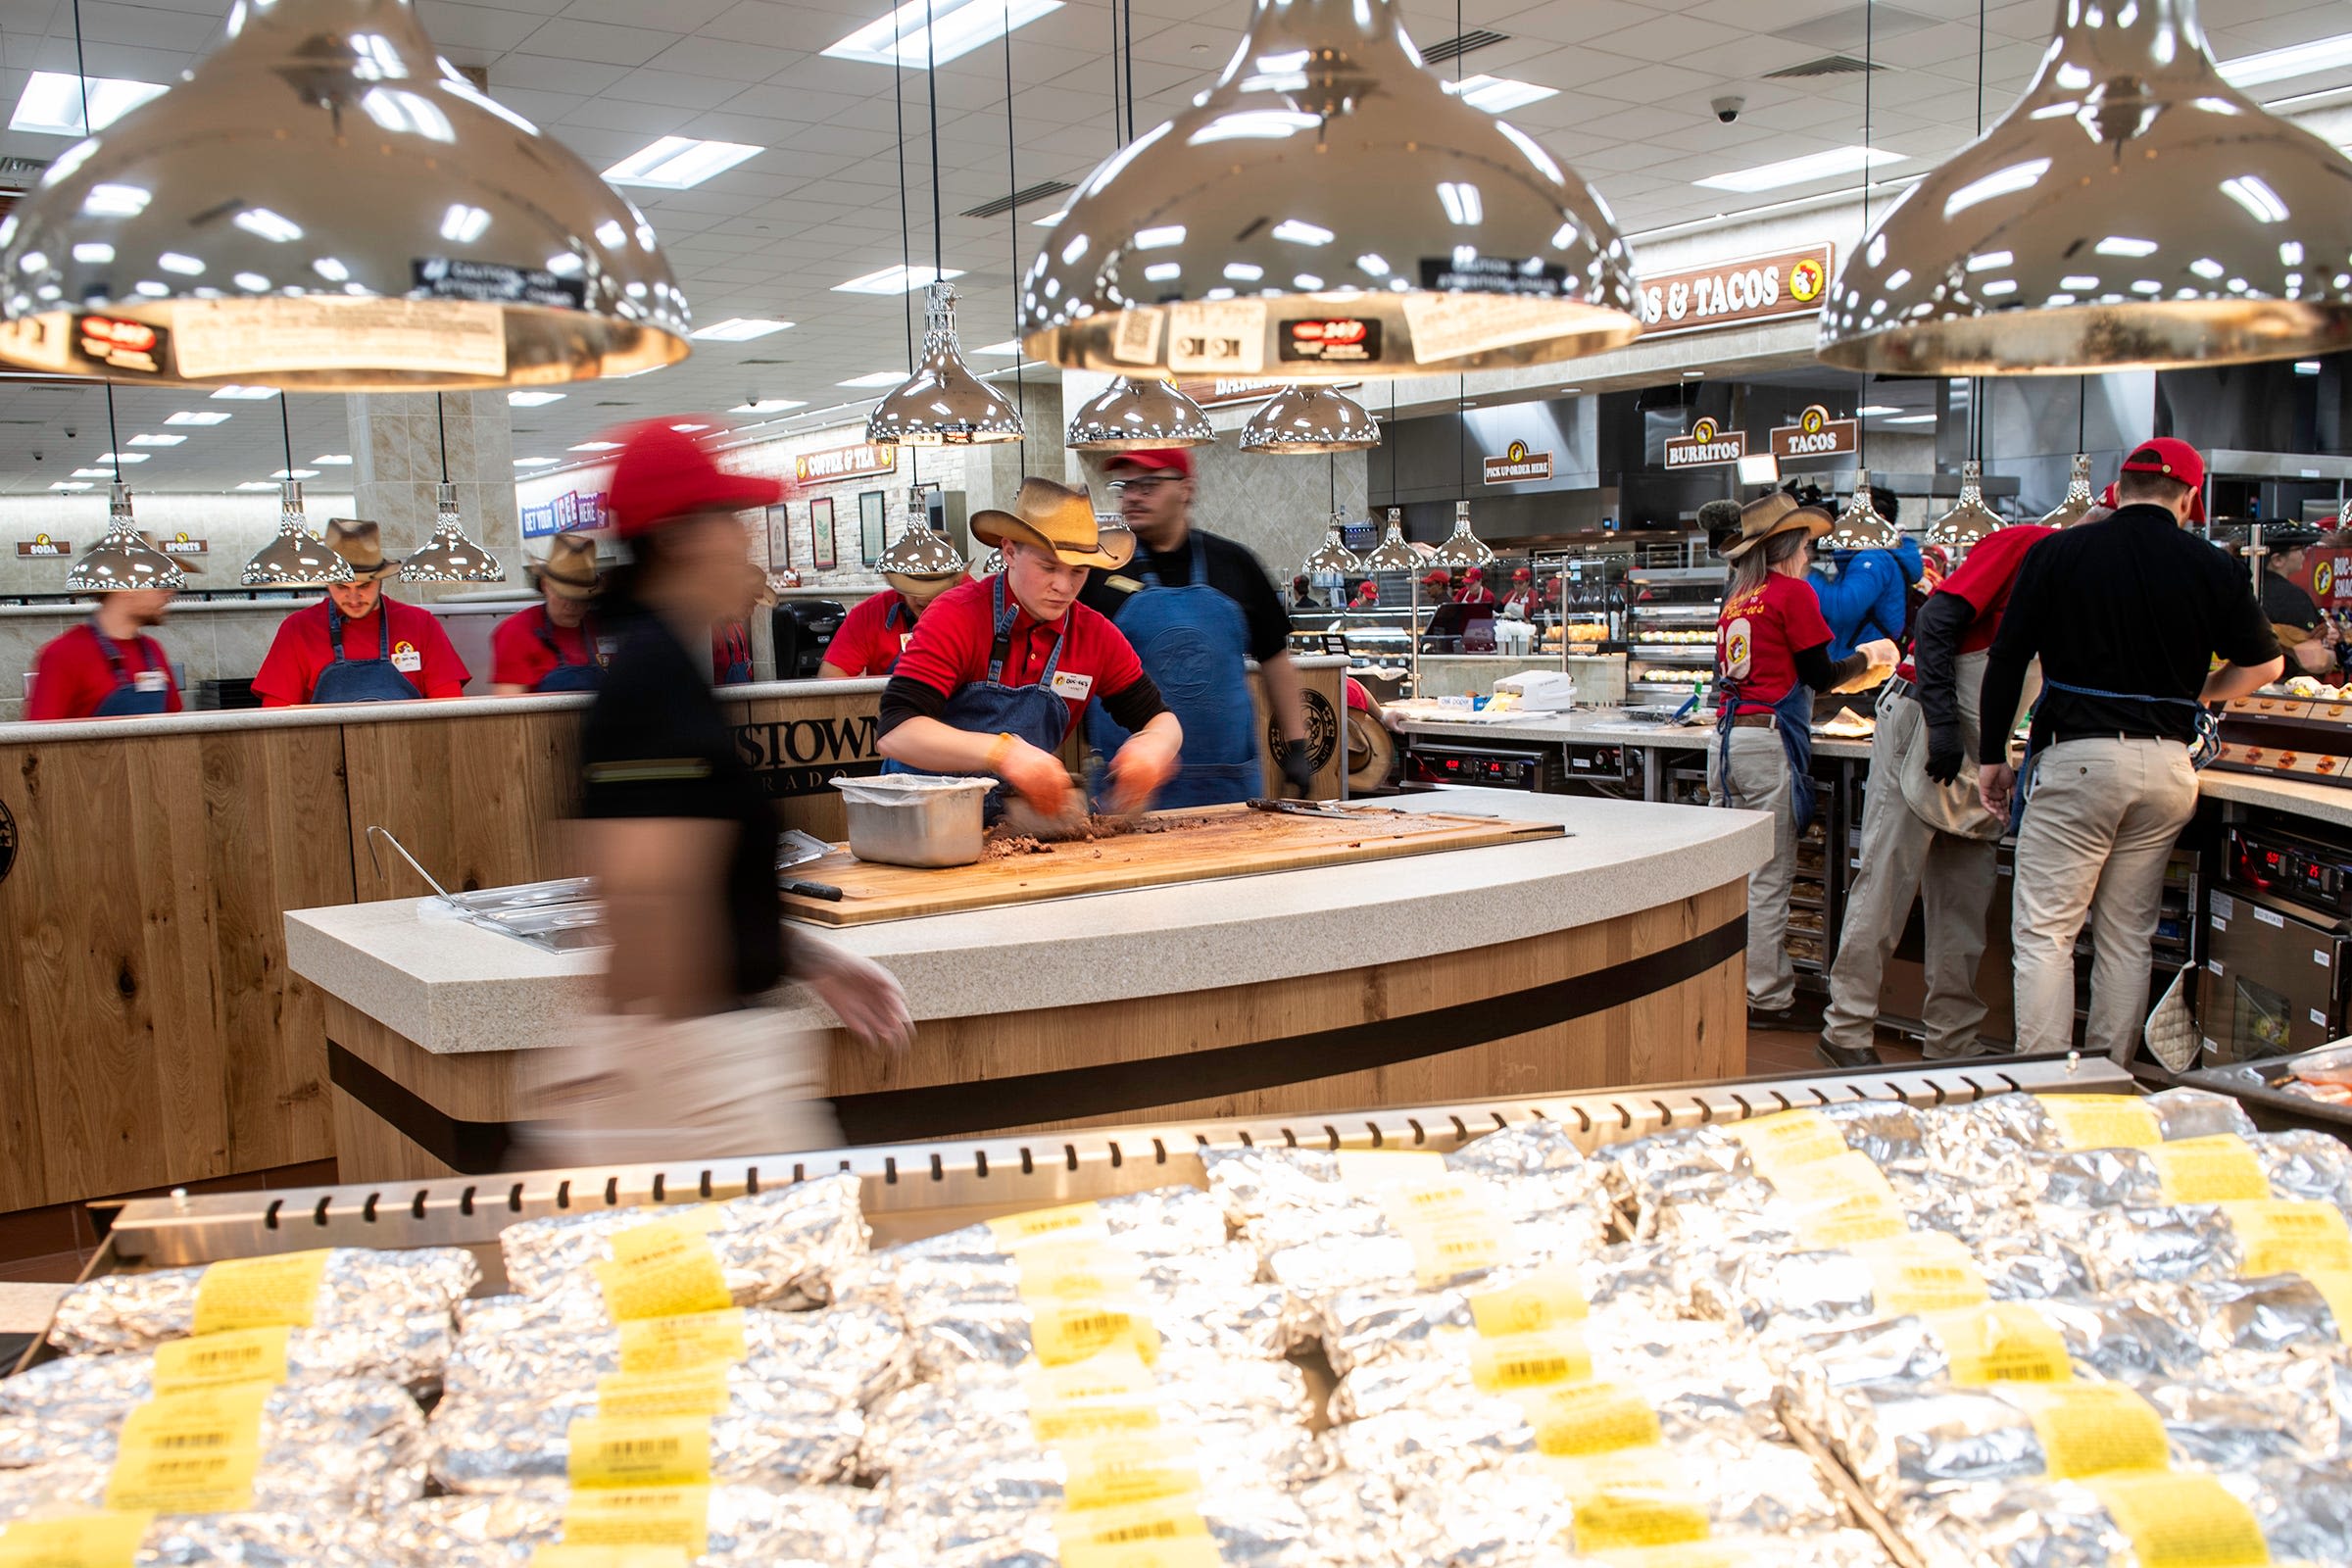 Buc-ee's largest store location to open in Texas next month: 'Where the legend began'